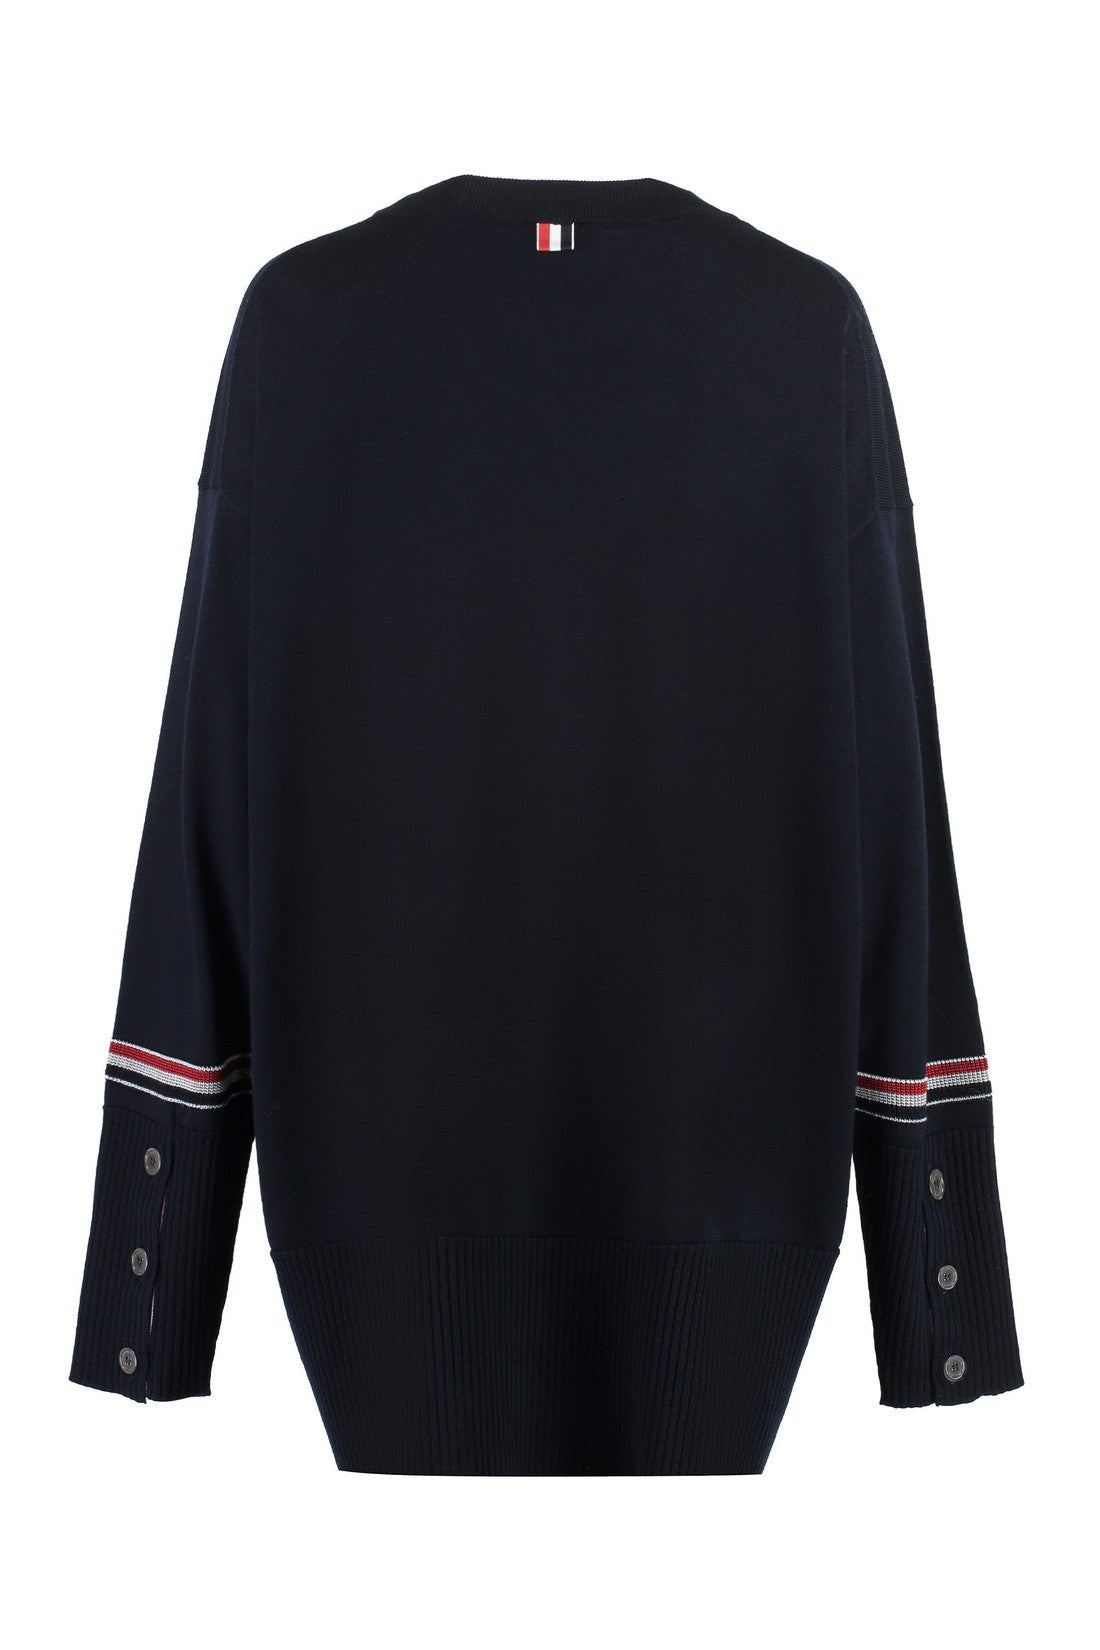 Thom Browne-OUTLET-SALE-Merino wool sweater-ARCHIVIST